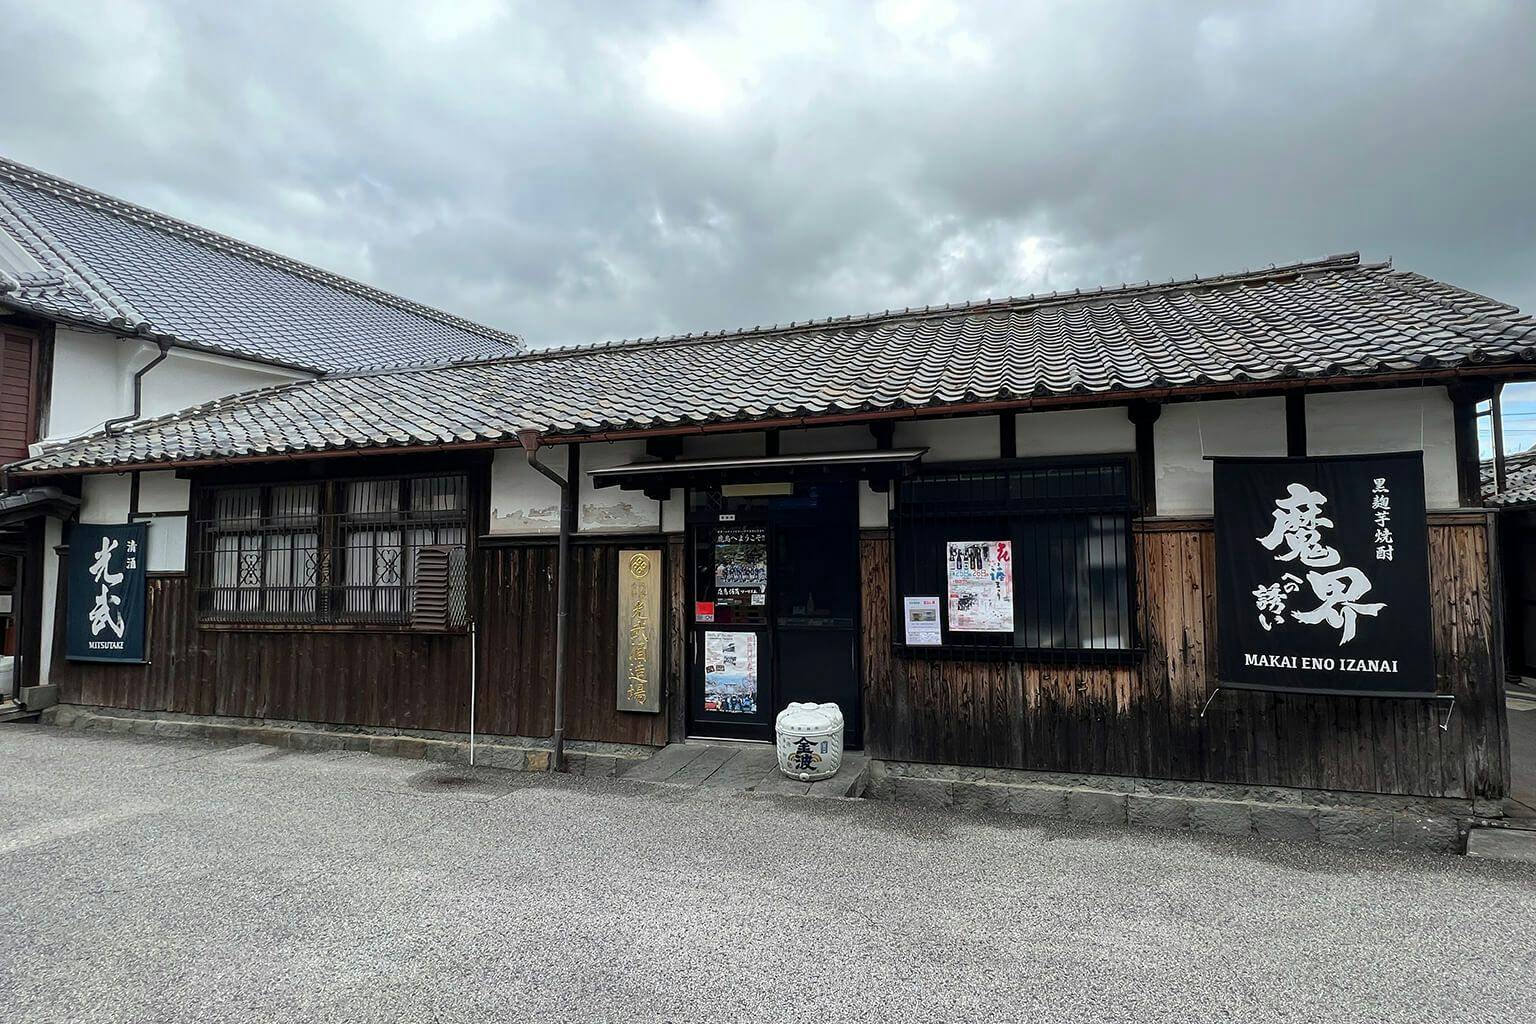 Mitsutake Brewing Company is located in Kashima, Saga prefecture, on a stretch of road called Hizen Hamashuku, or Sakagura-dori. This area, recognized as an Important Preservation District for Groups of Traditional Buildings, is lined with sake breweries and sake shops. | Photo by Azusa K.